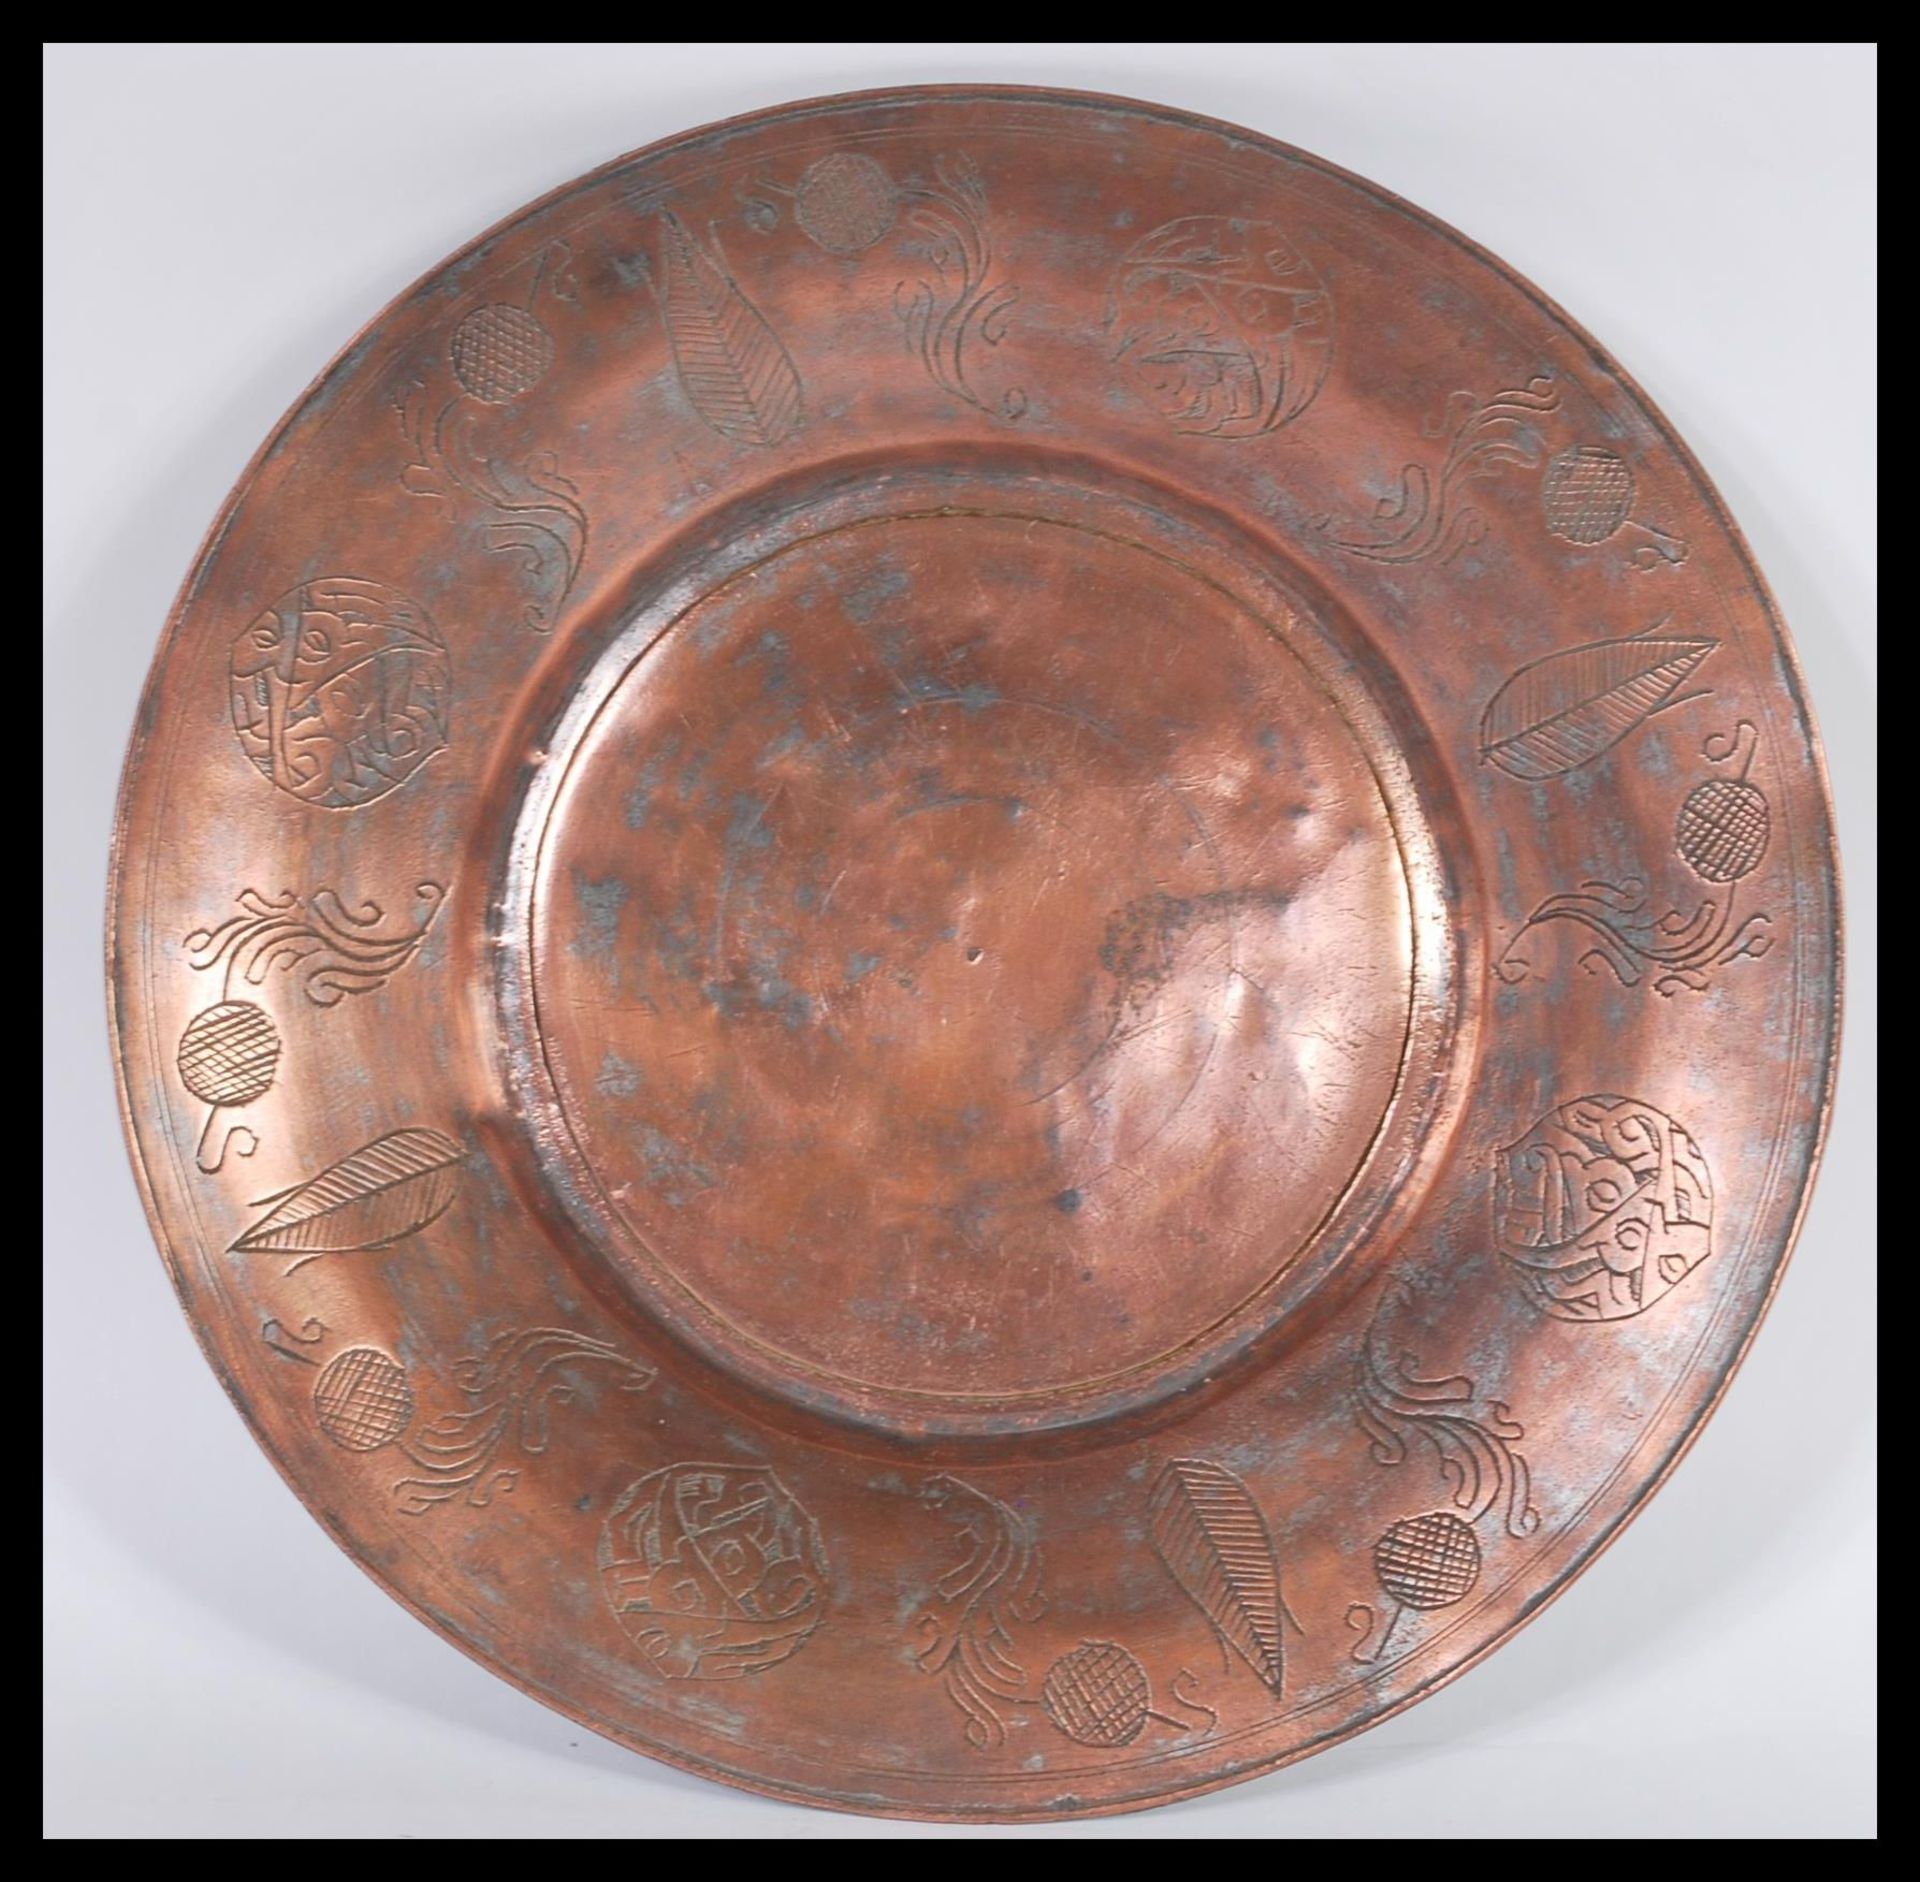 A 19th Century Middle Eastern Persian Islamic copper wall charger plate tray. The central well